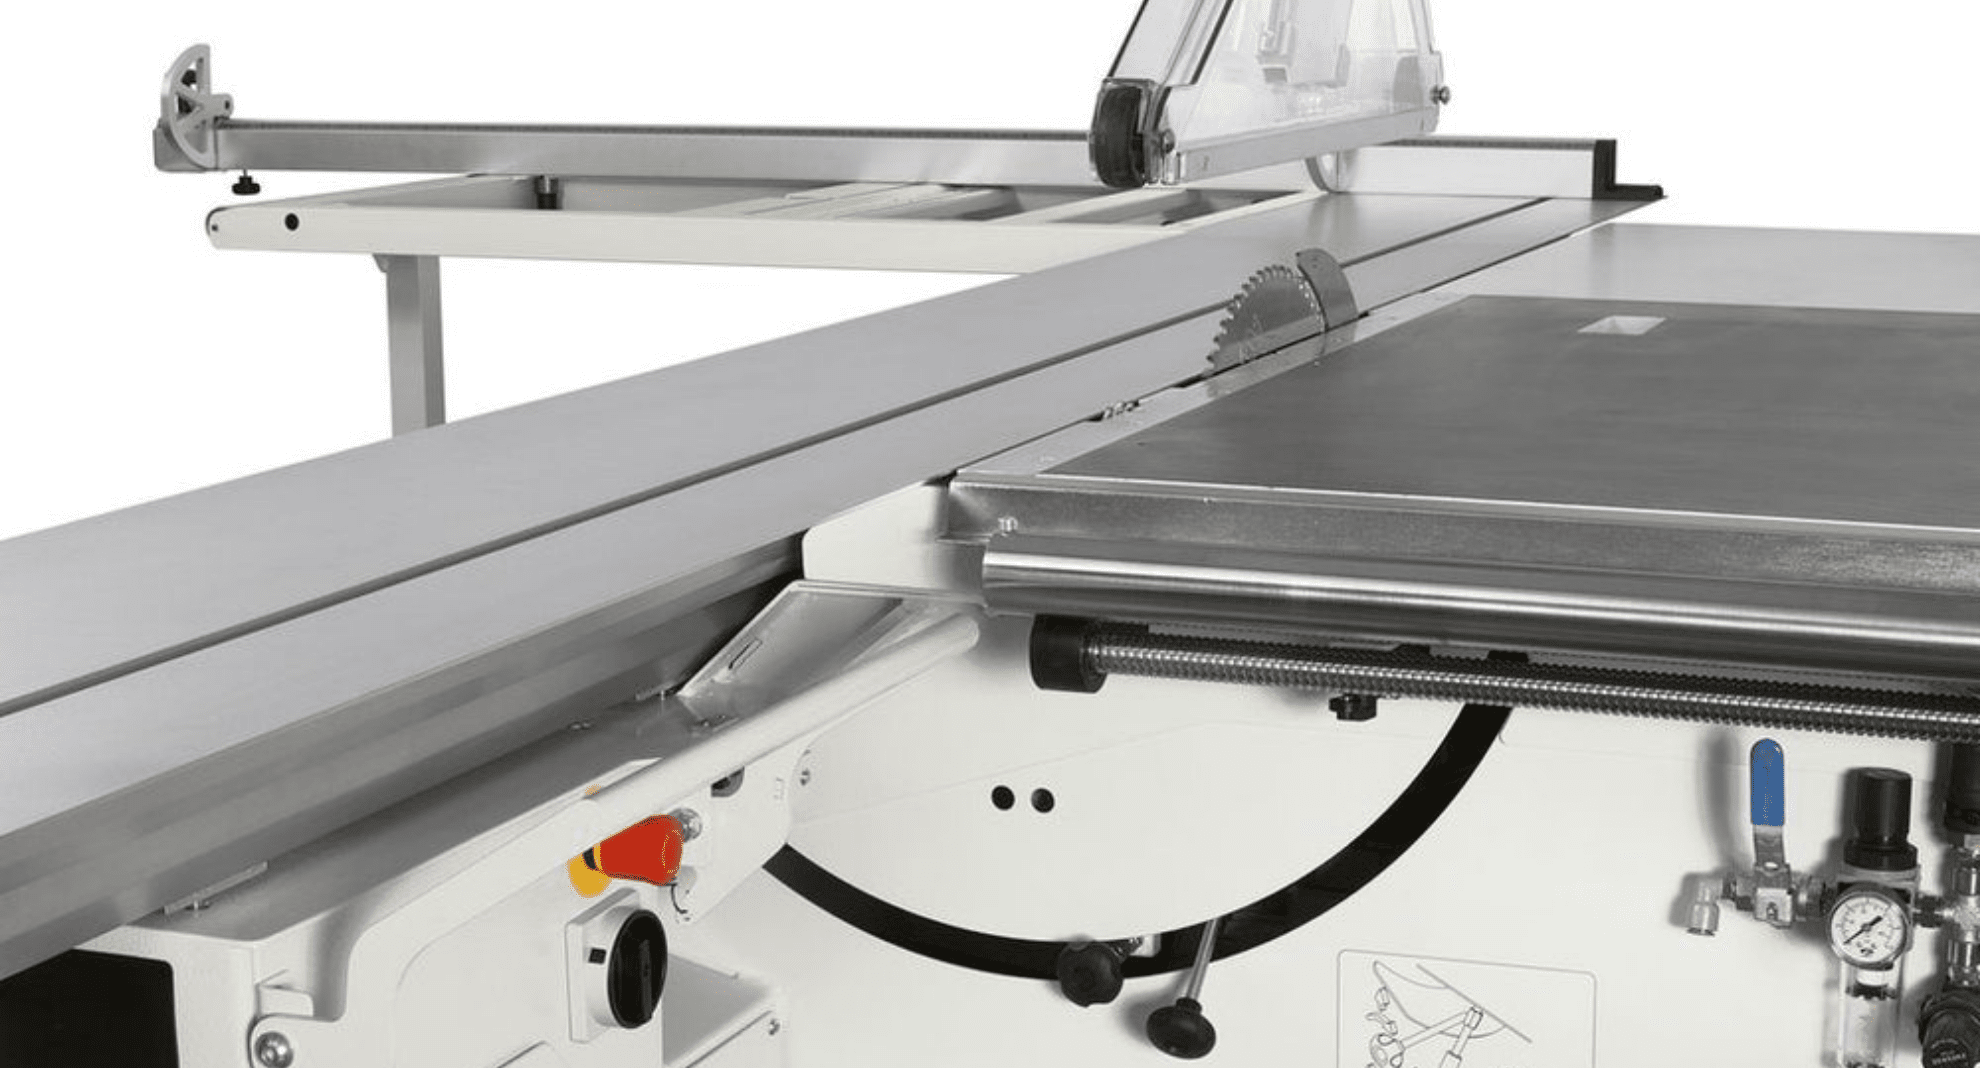 The sliding table on a panel saw